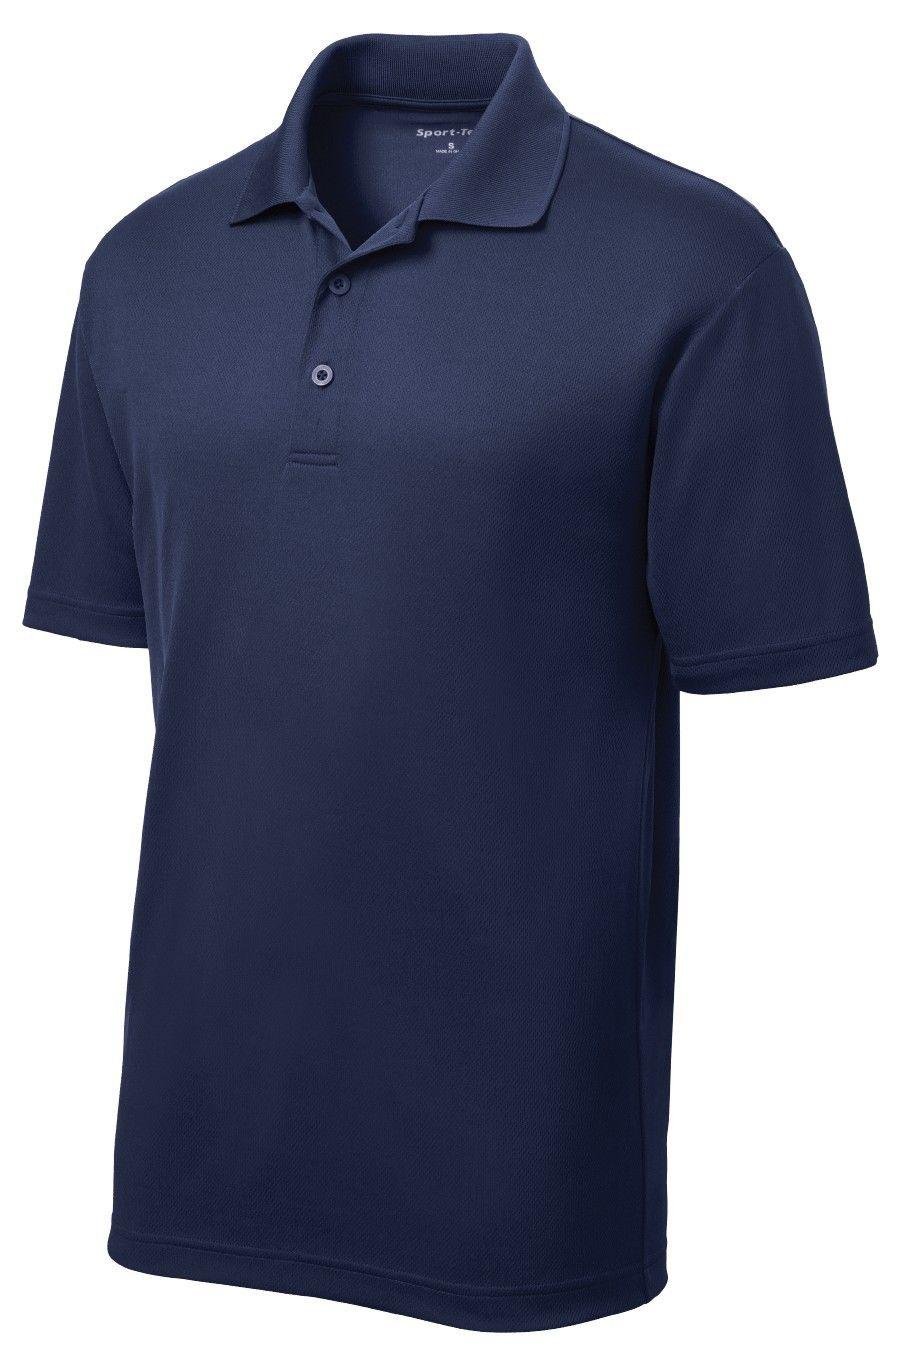 100% polyester dry fit men's sports polo t shirts 2